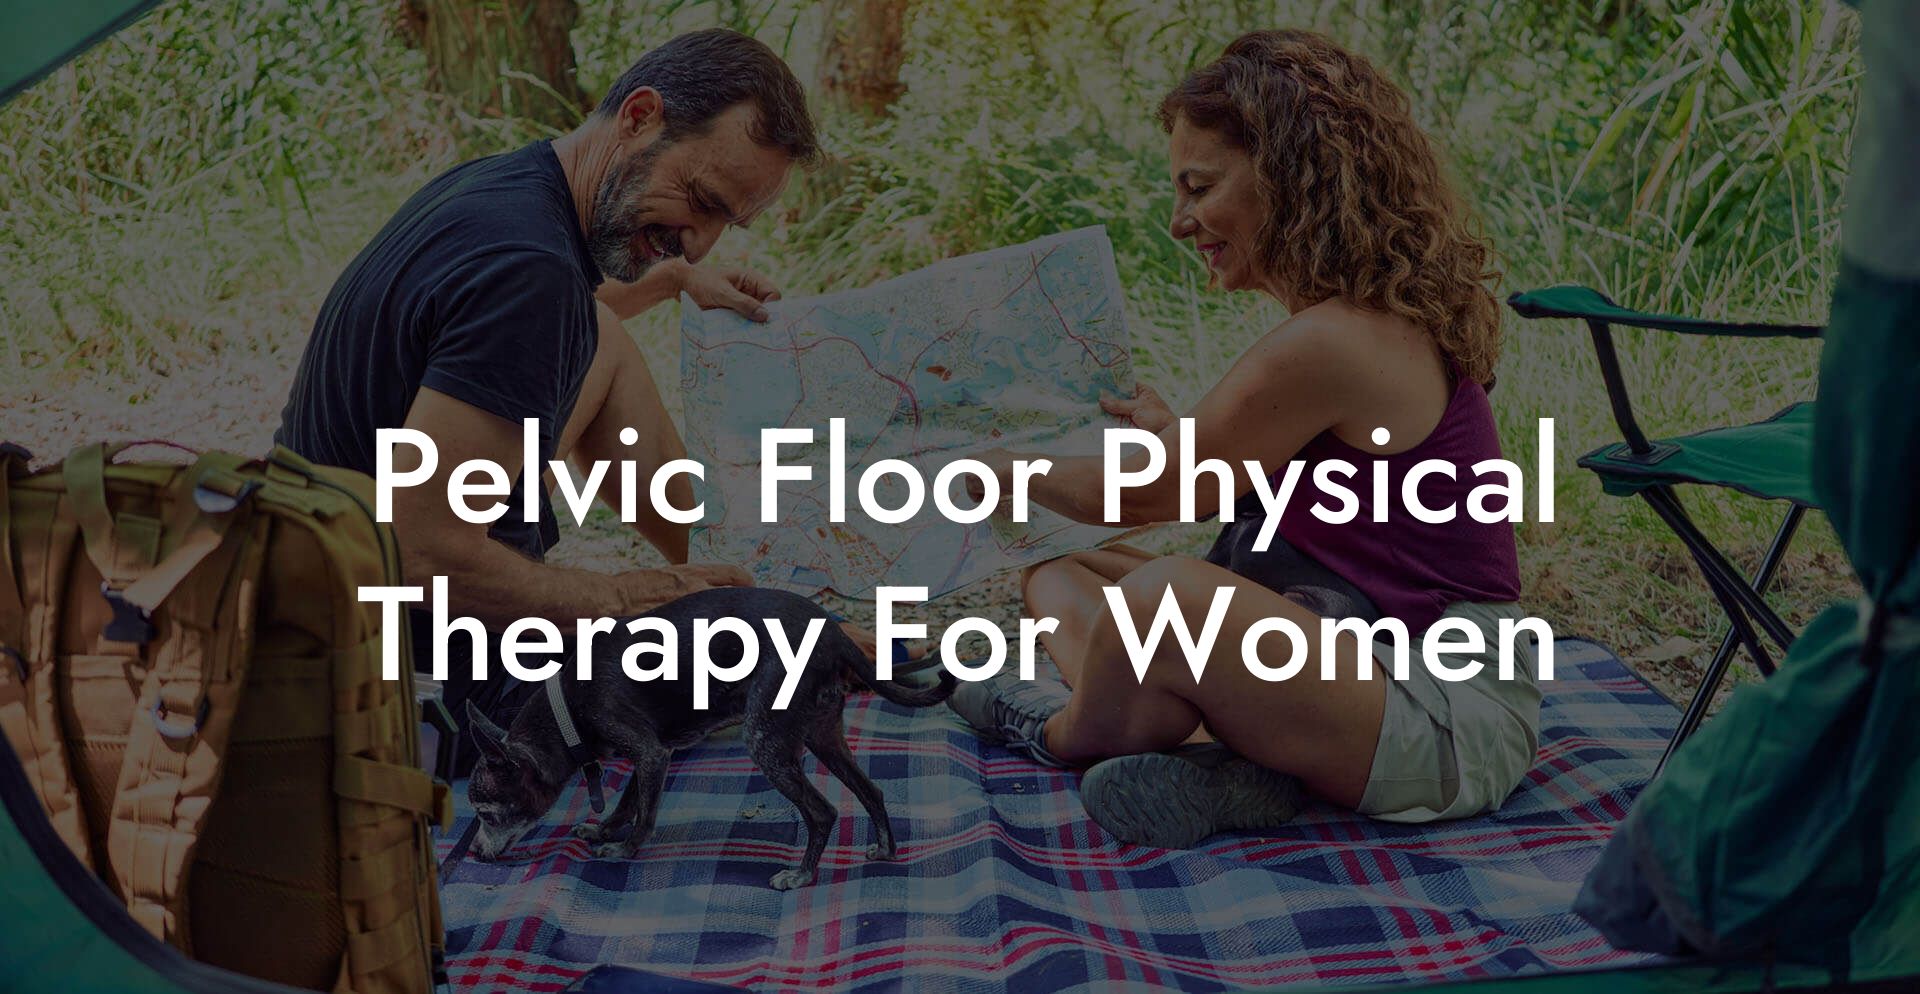 Pelvic Floor Physical Therapy For Women